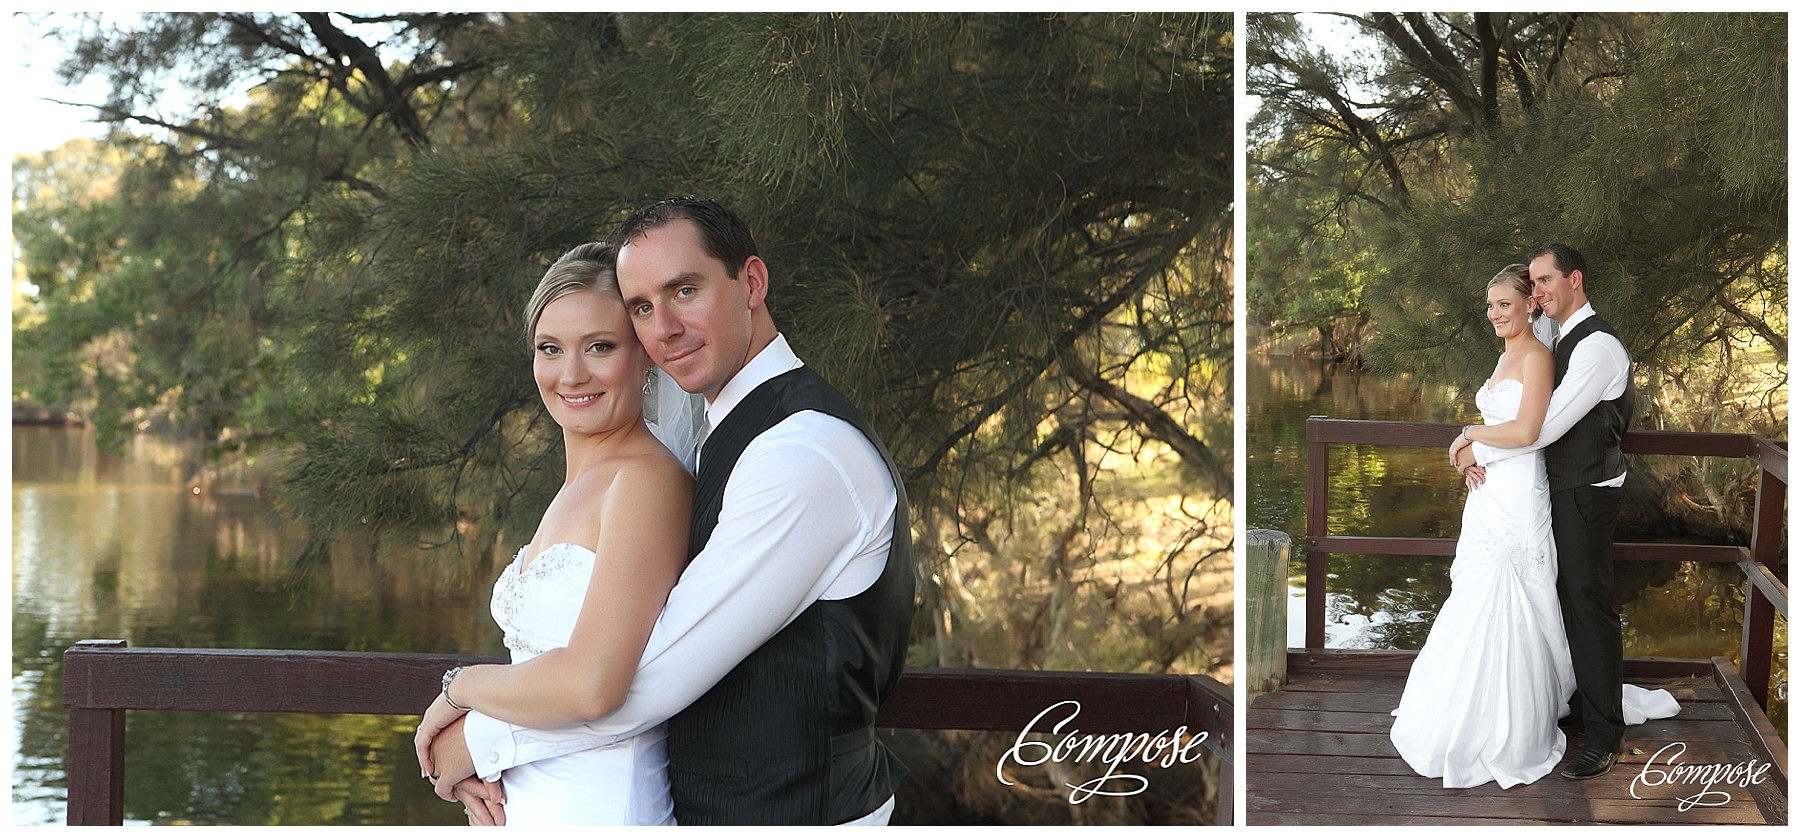 Sandalford wedding by the river 